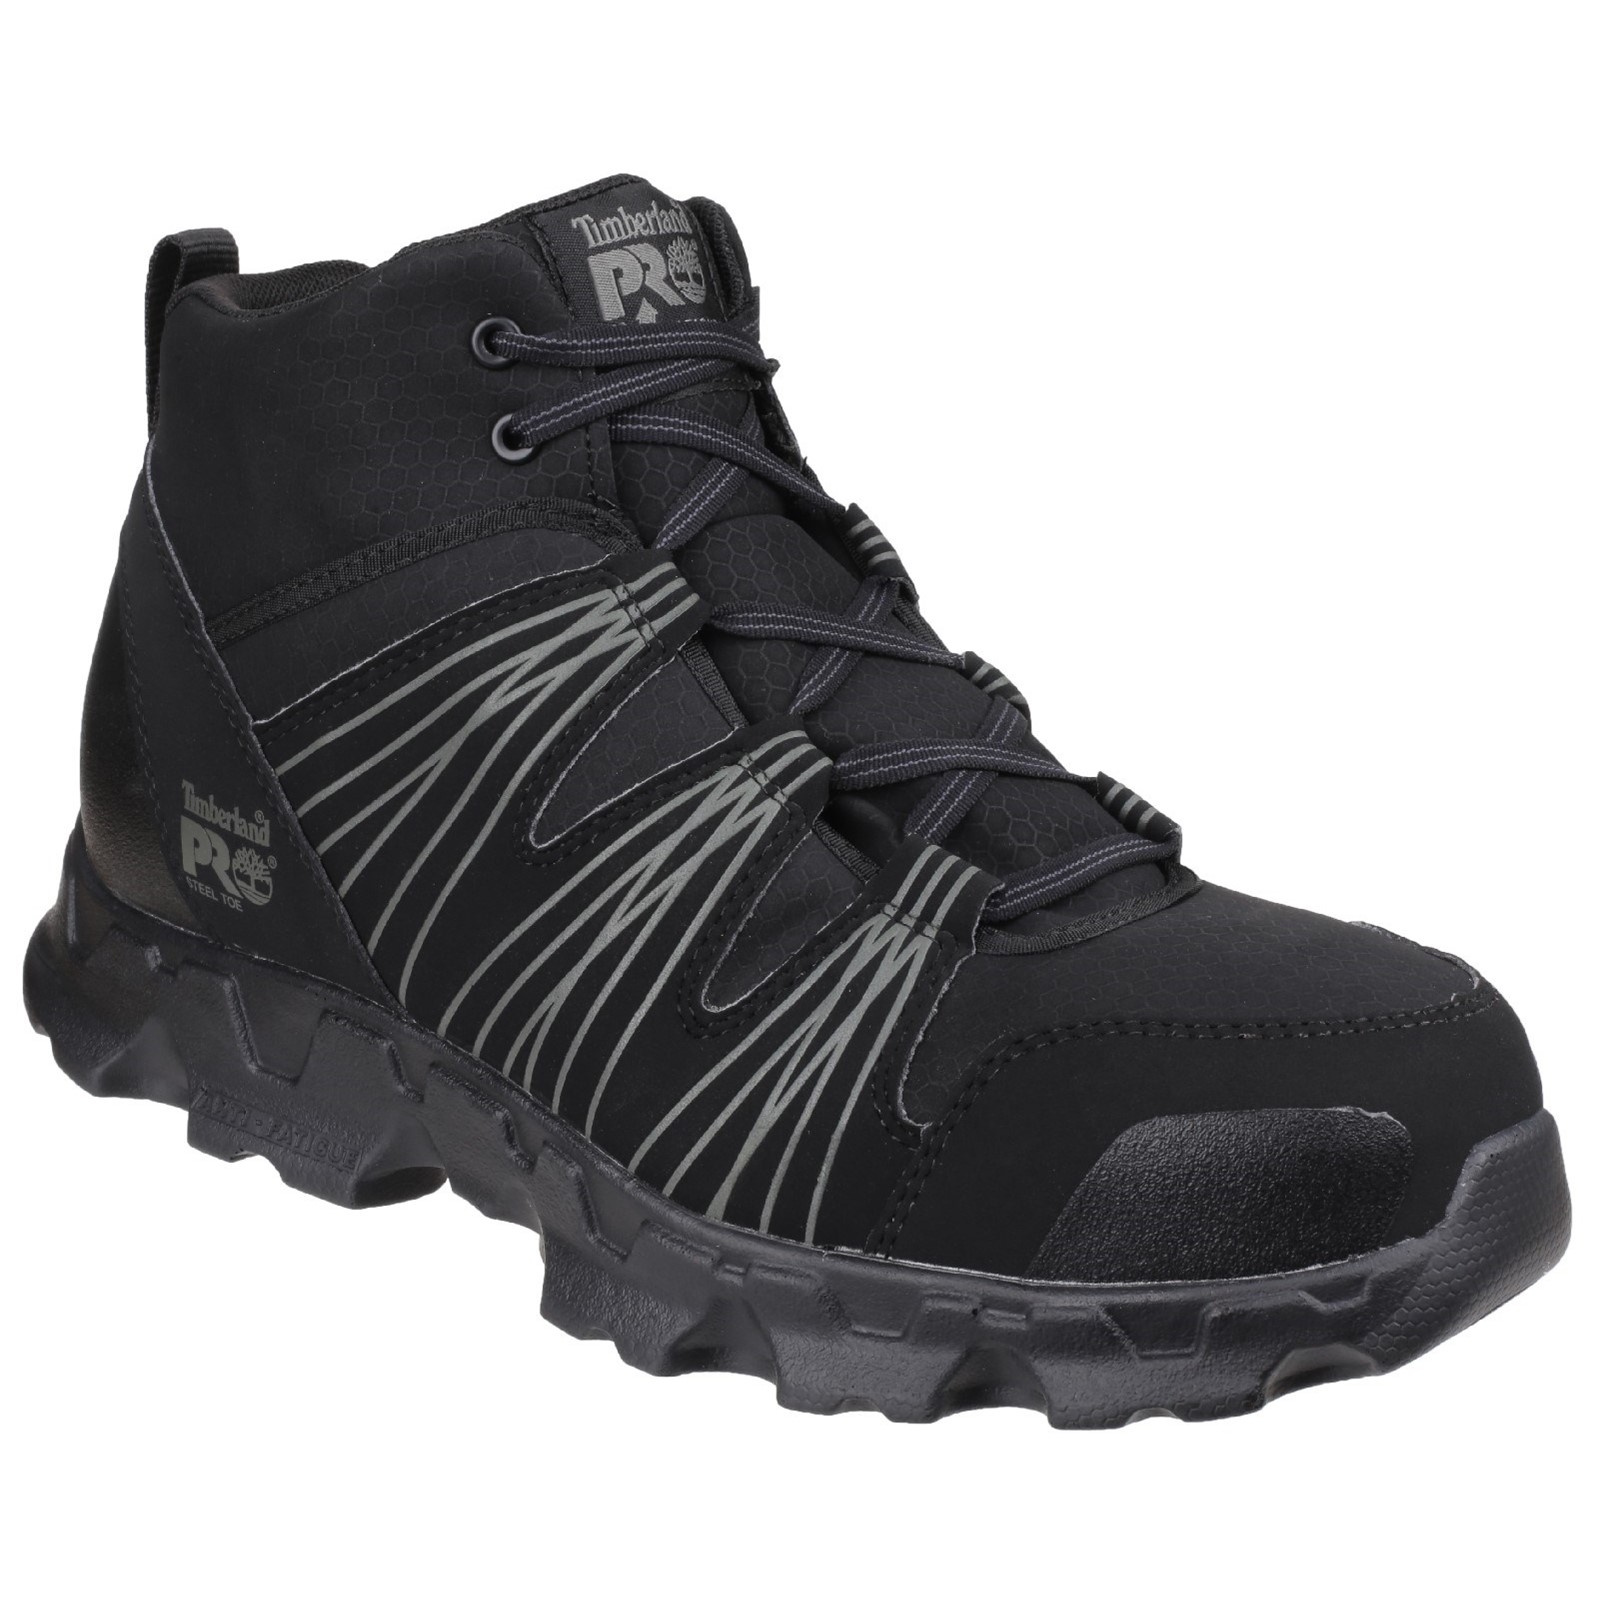 Powertrain Mid Black Lace up Safety Boot